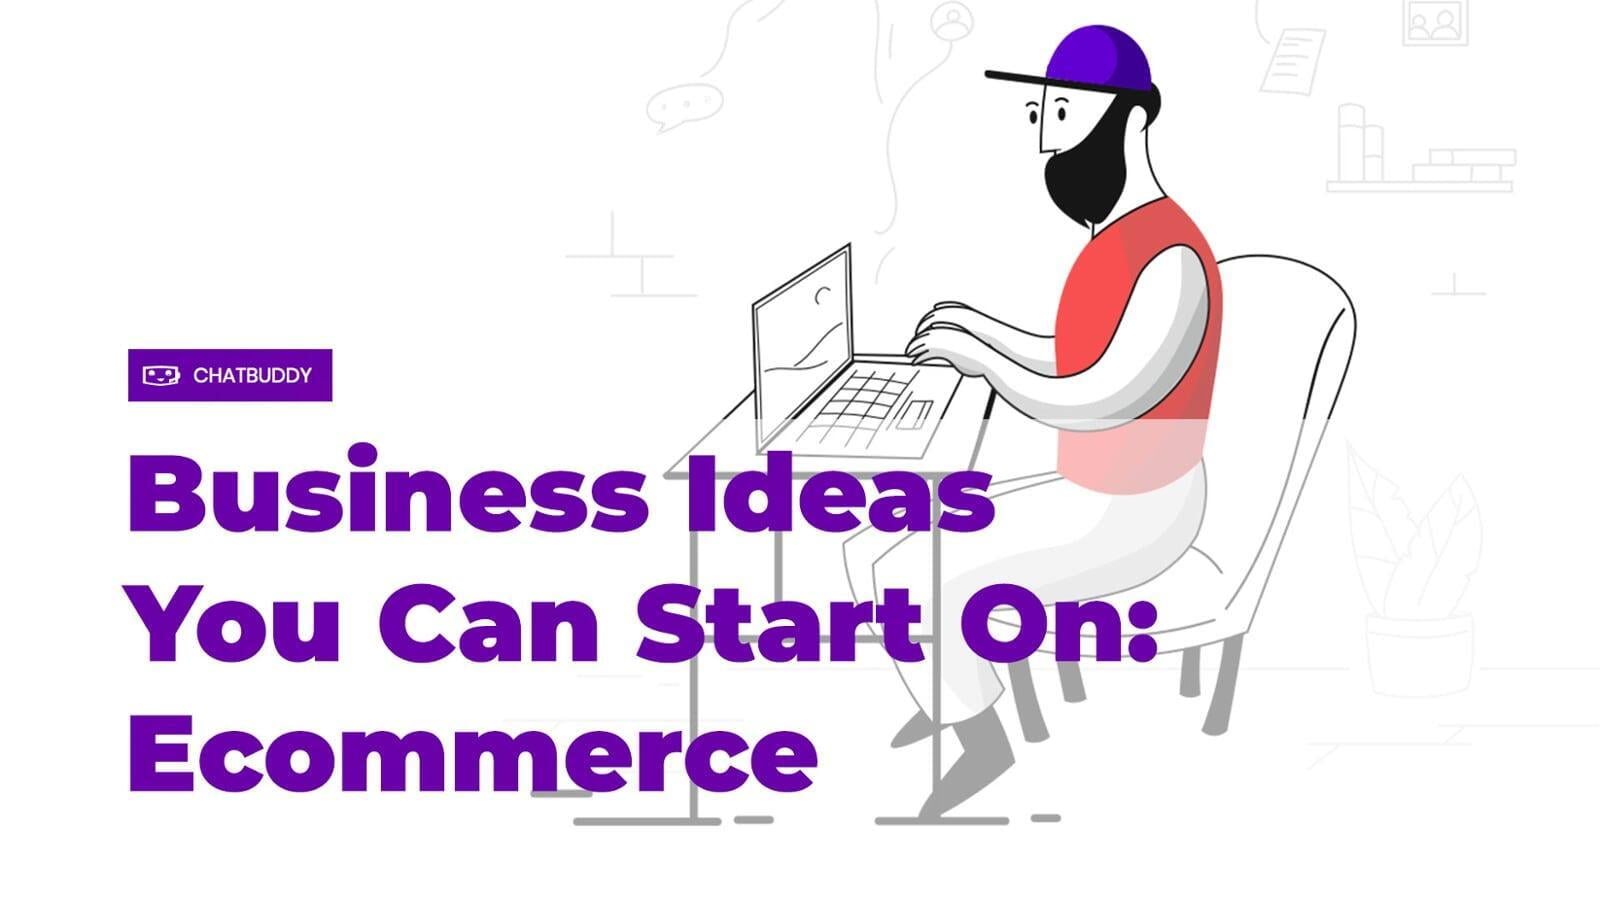 Business Ideas You Can Start On: Ecommerce